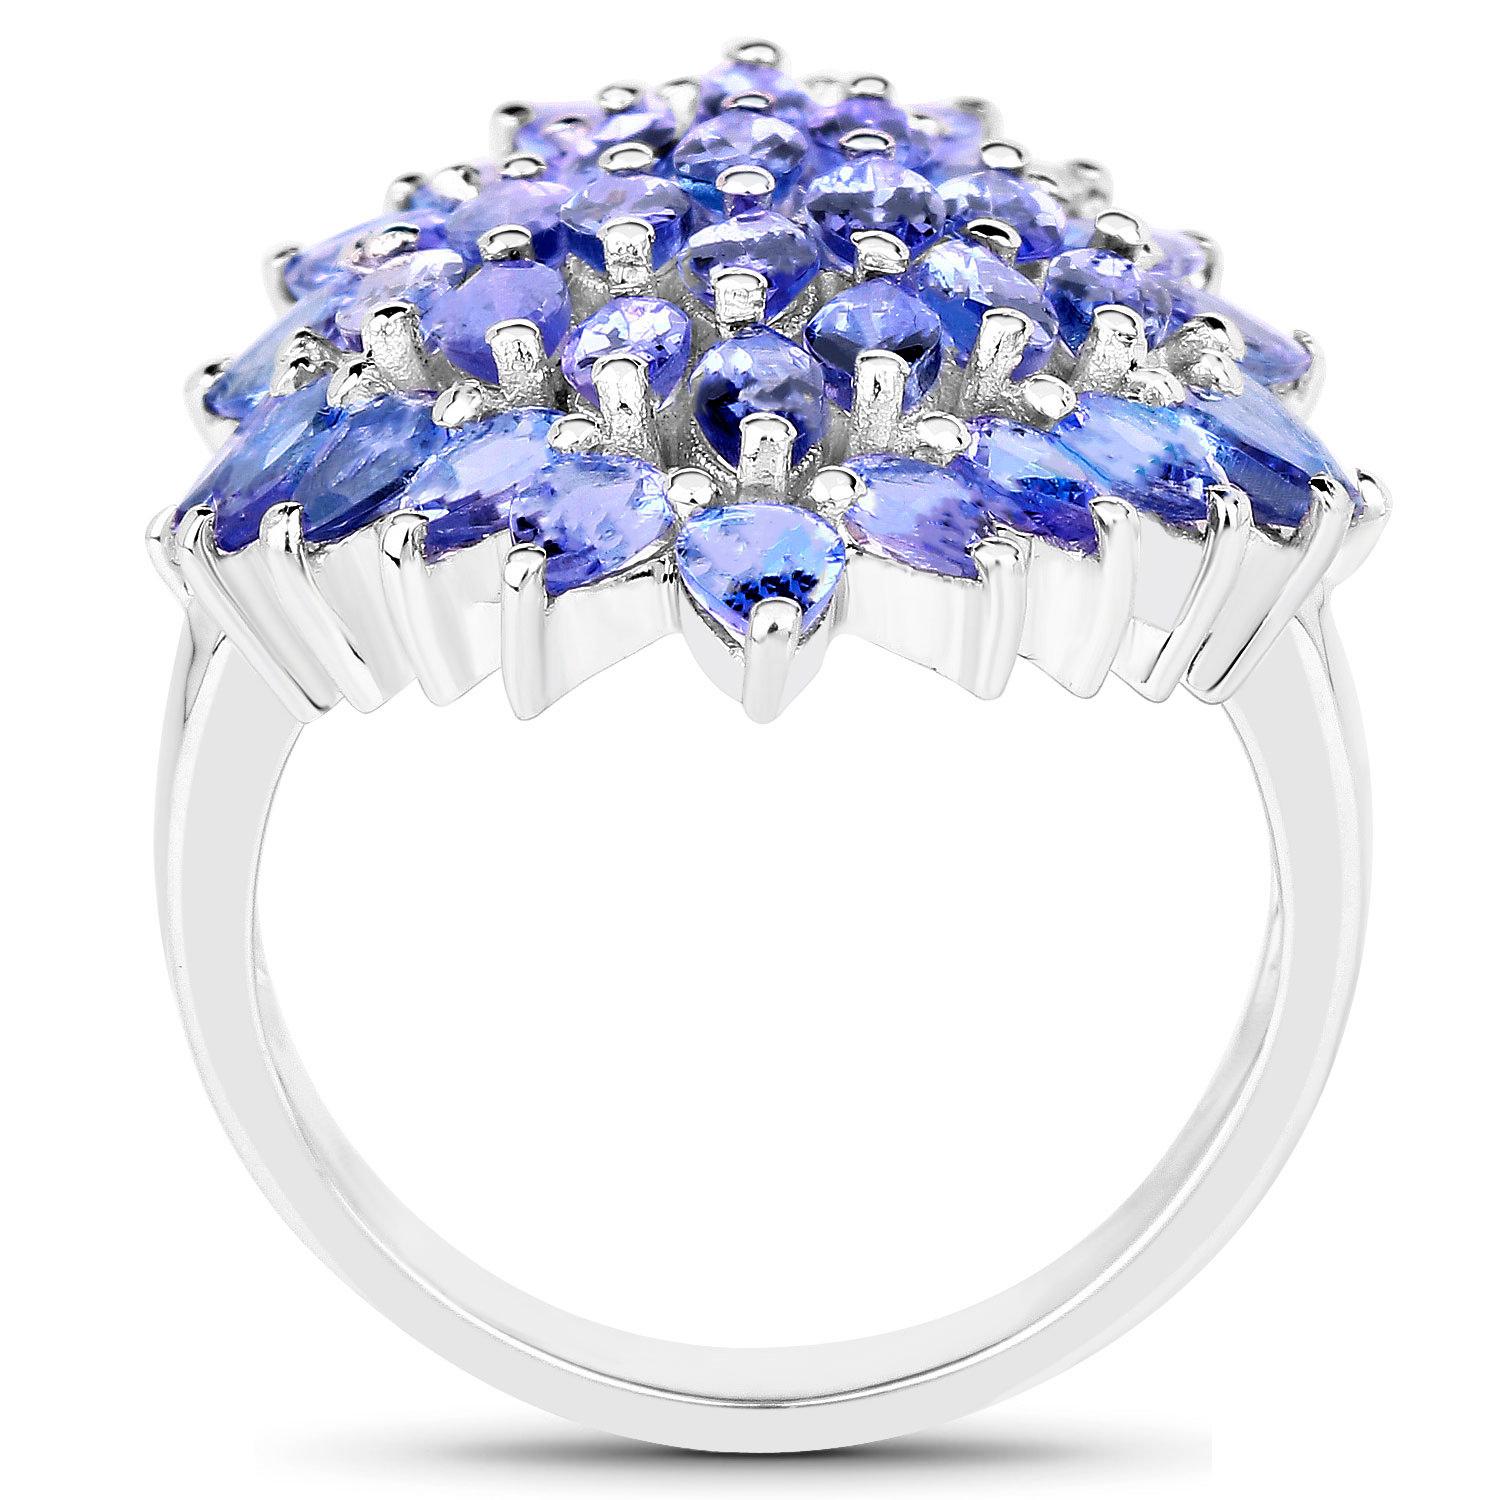 Tanzanite Cluster Ring 5.05 Carats Sterling Silver In Excellent Condition For Sale In Laguna Niguel, CA